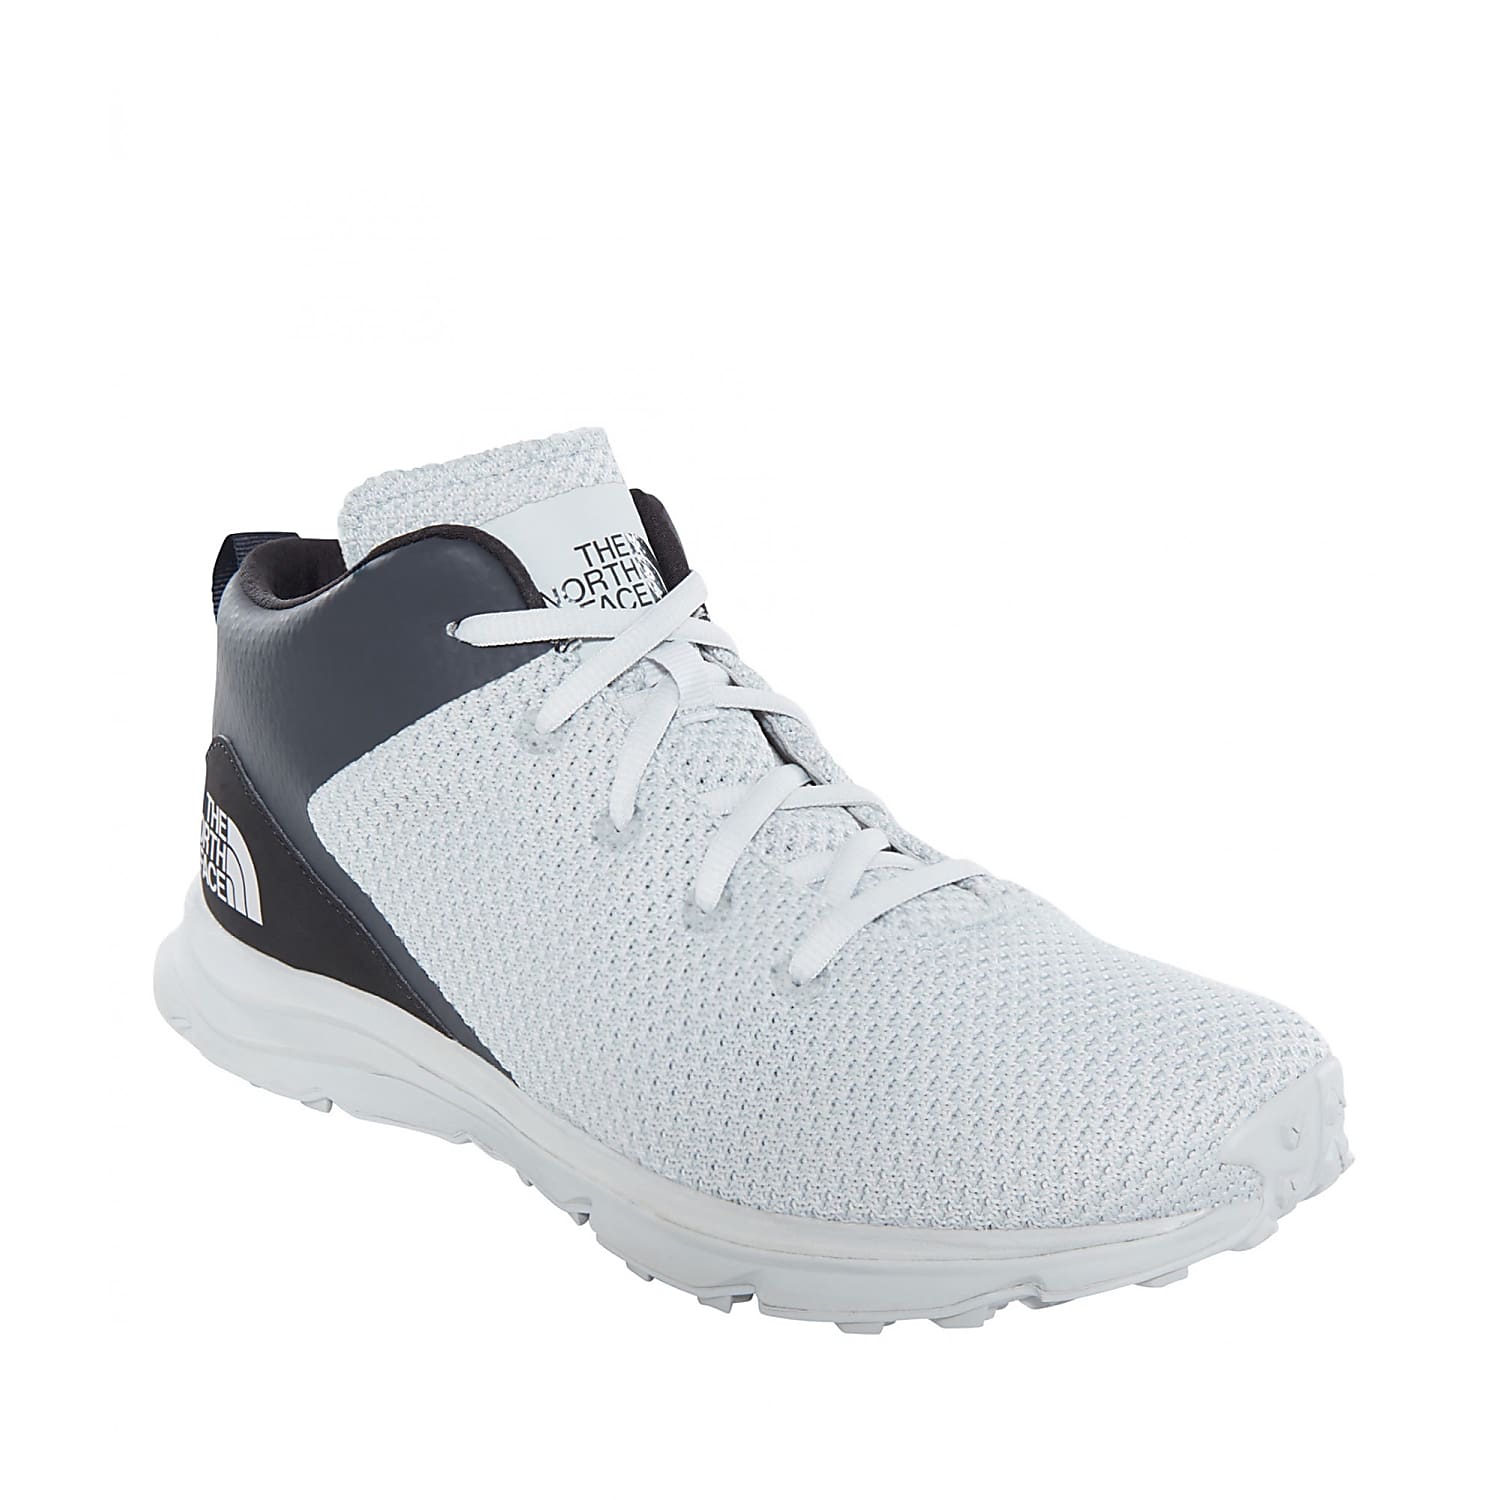 North Face M SESTRIERE MID, Tin Grey 